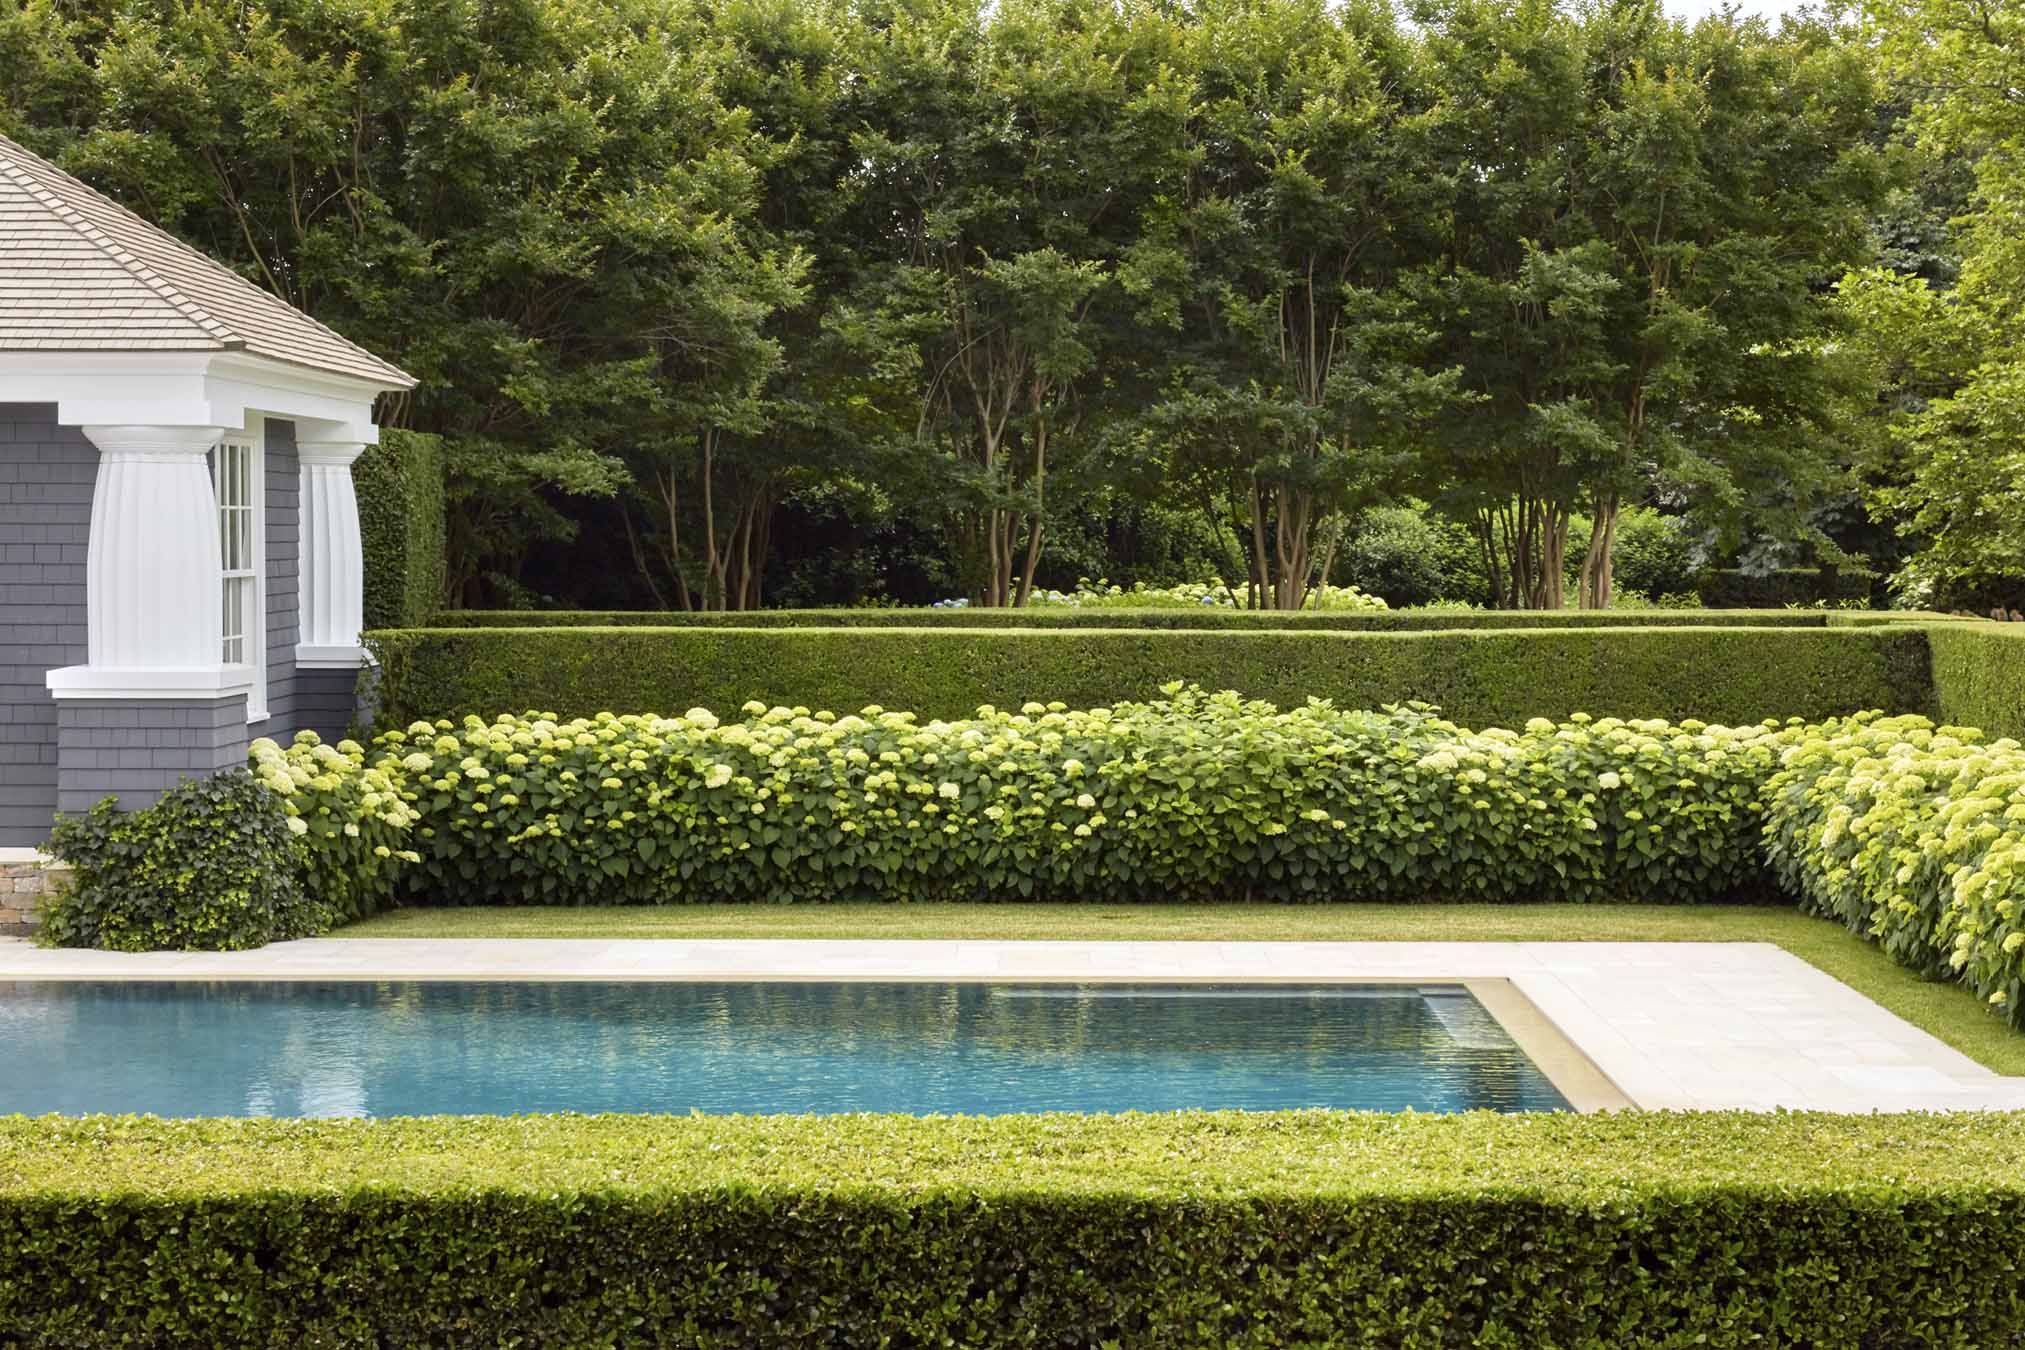 French garden design with boxwood hedges for clean lines